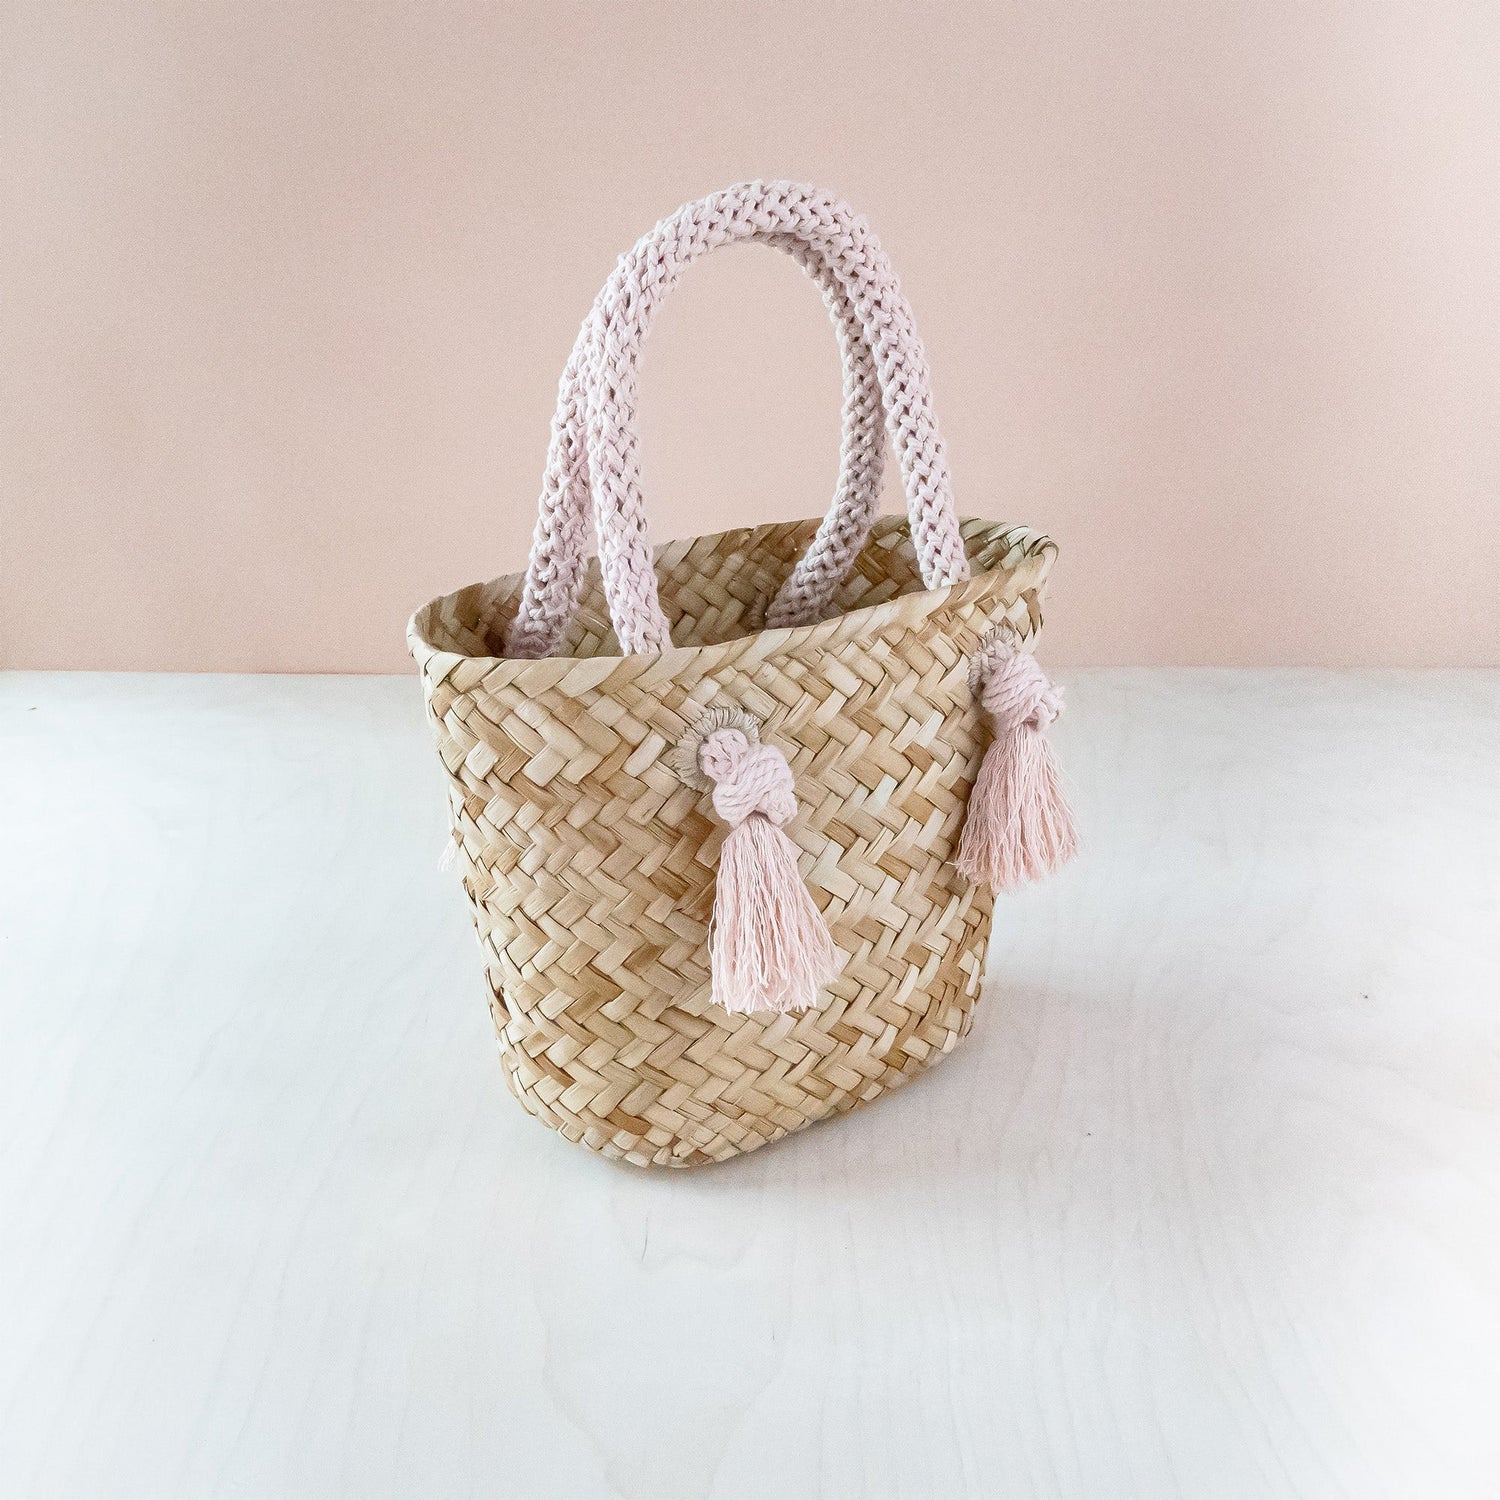 Dusty Rose Small Woven Tote with Cord Handles